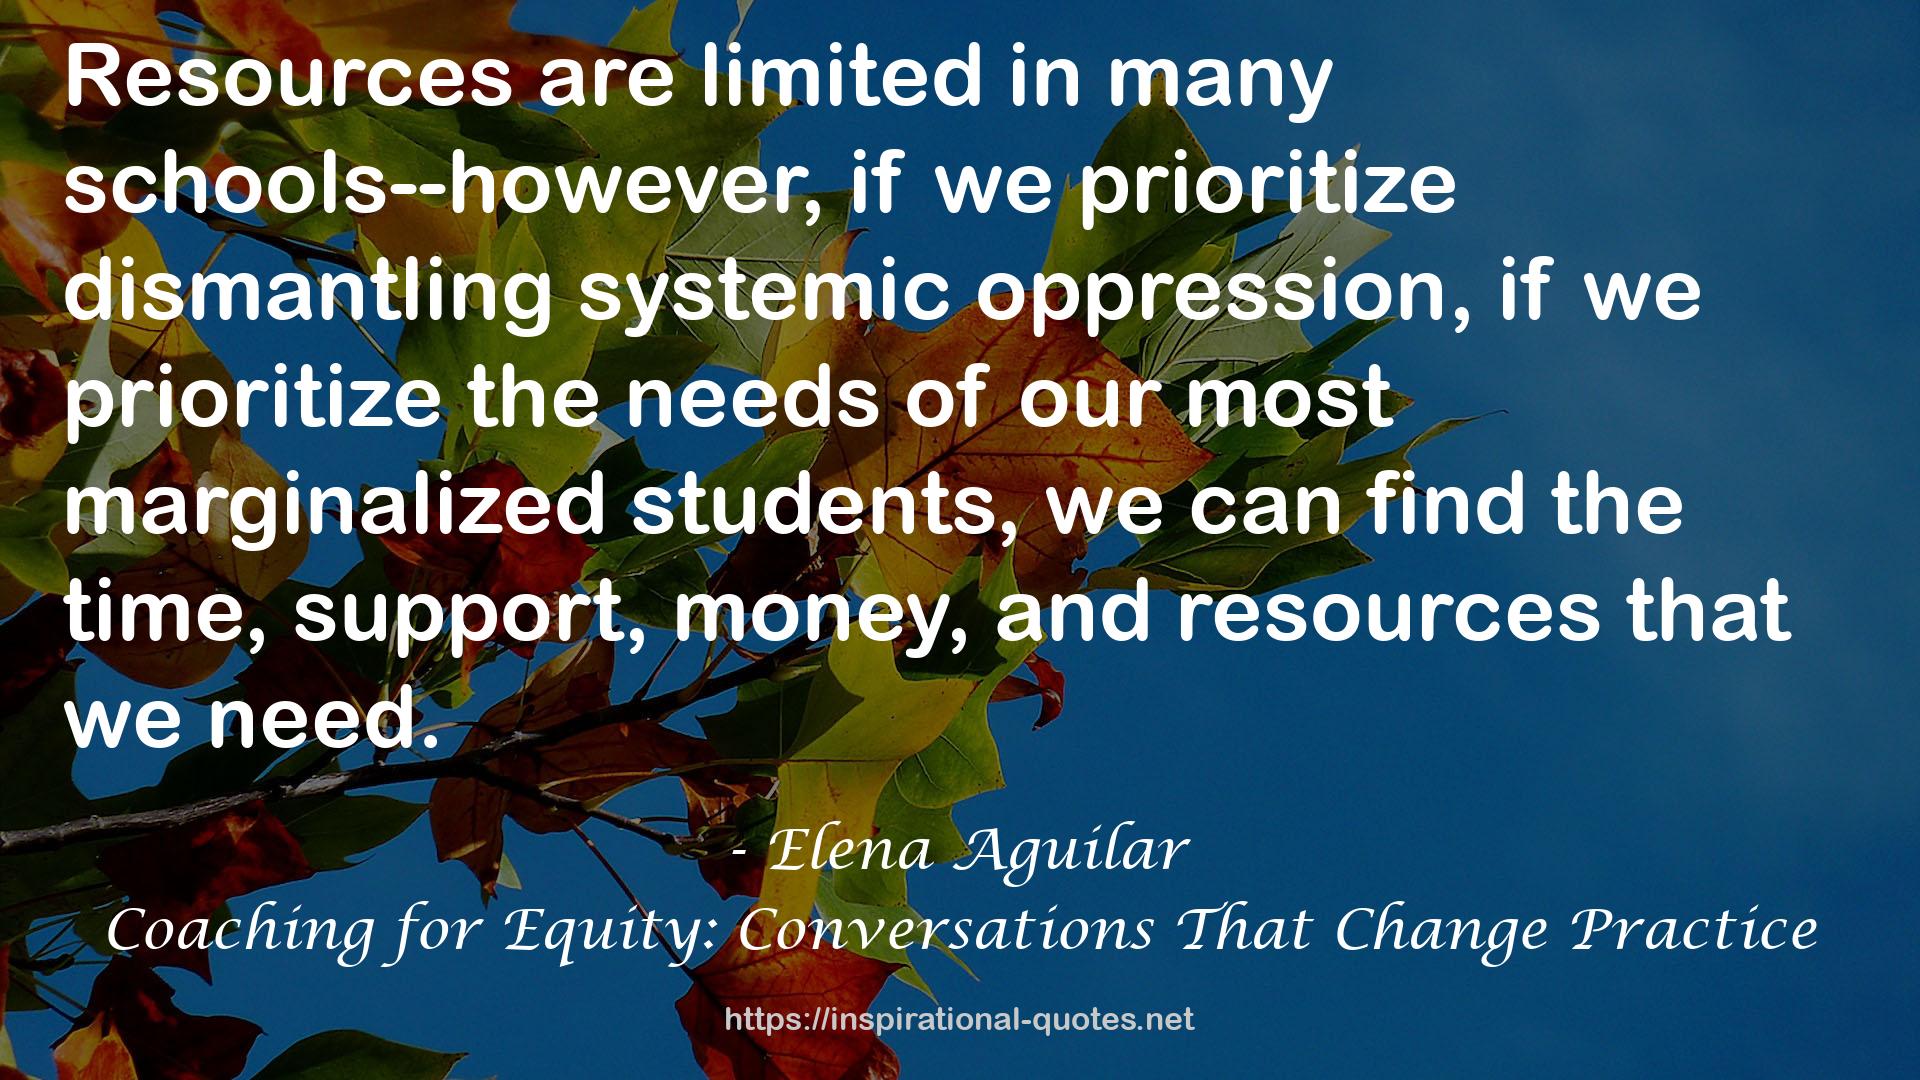 Coaching for Equity: Conversations That Change Practice QUOTES